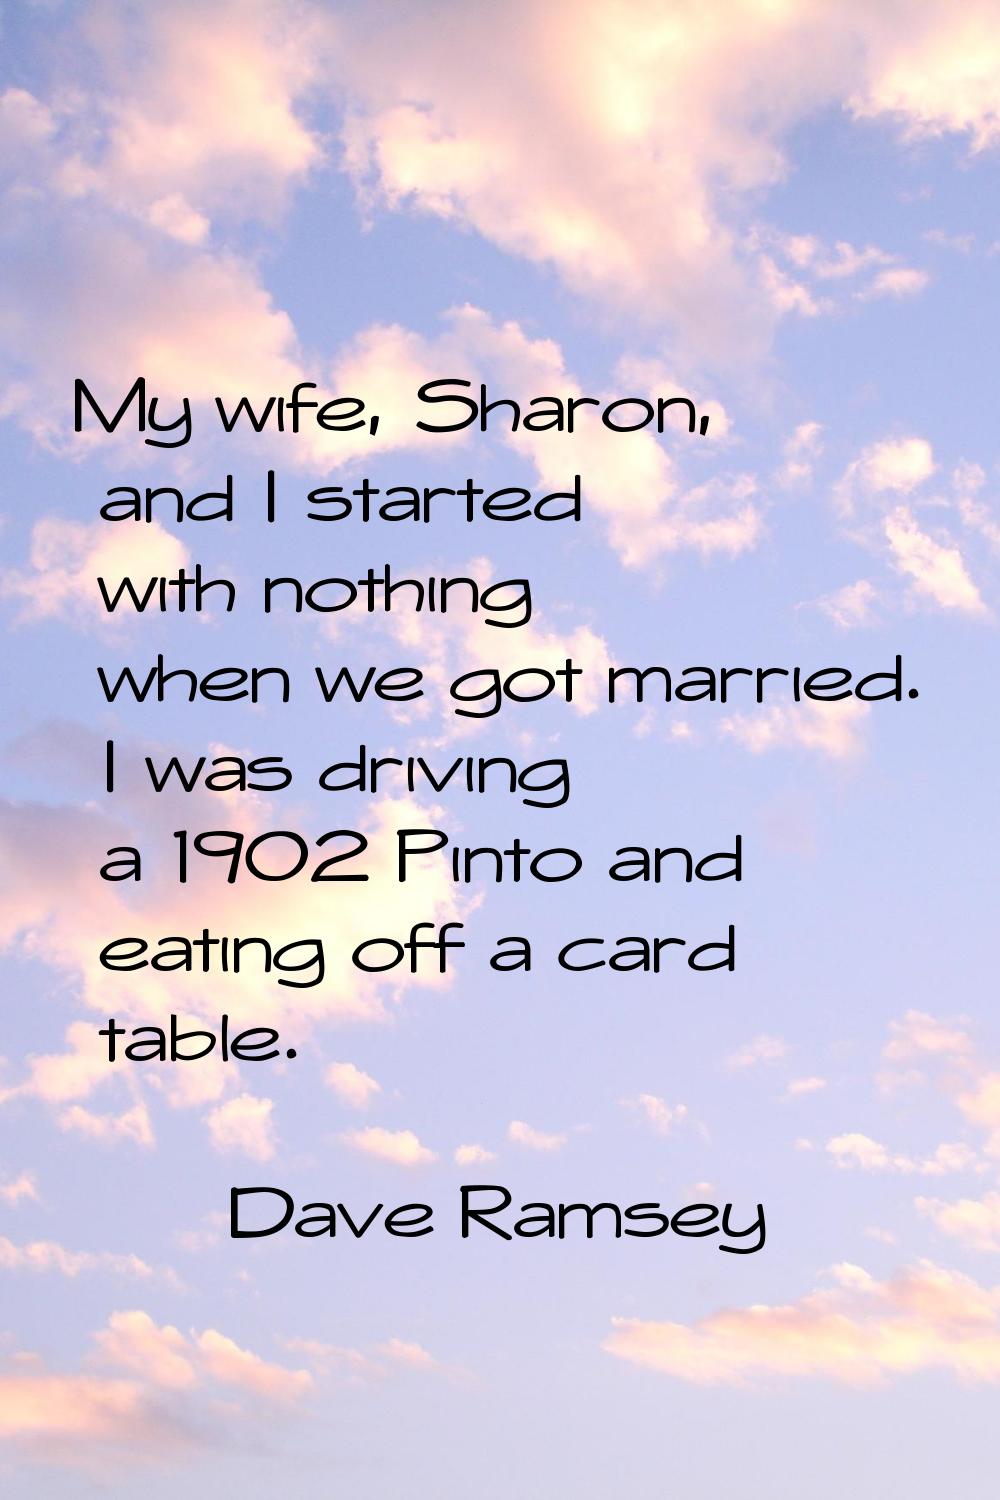 My wife, Sharon, and I started with nothing when we got married. I was driving a 1902 Pinto and eat